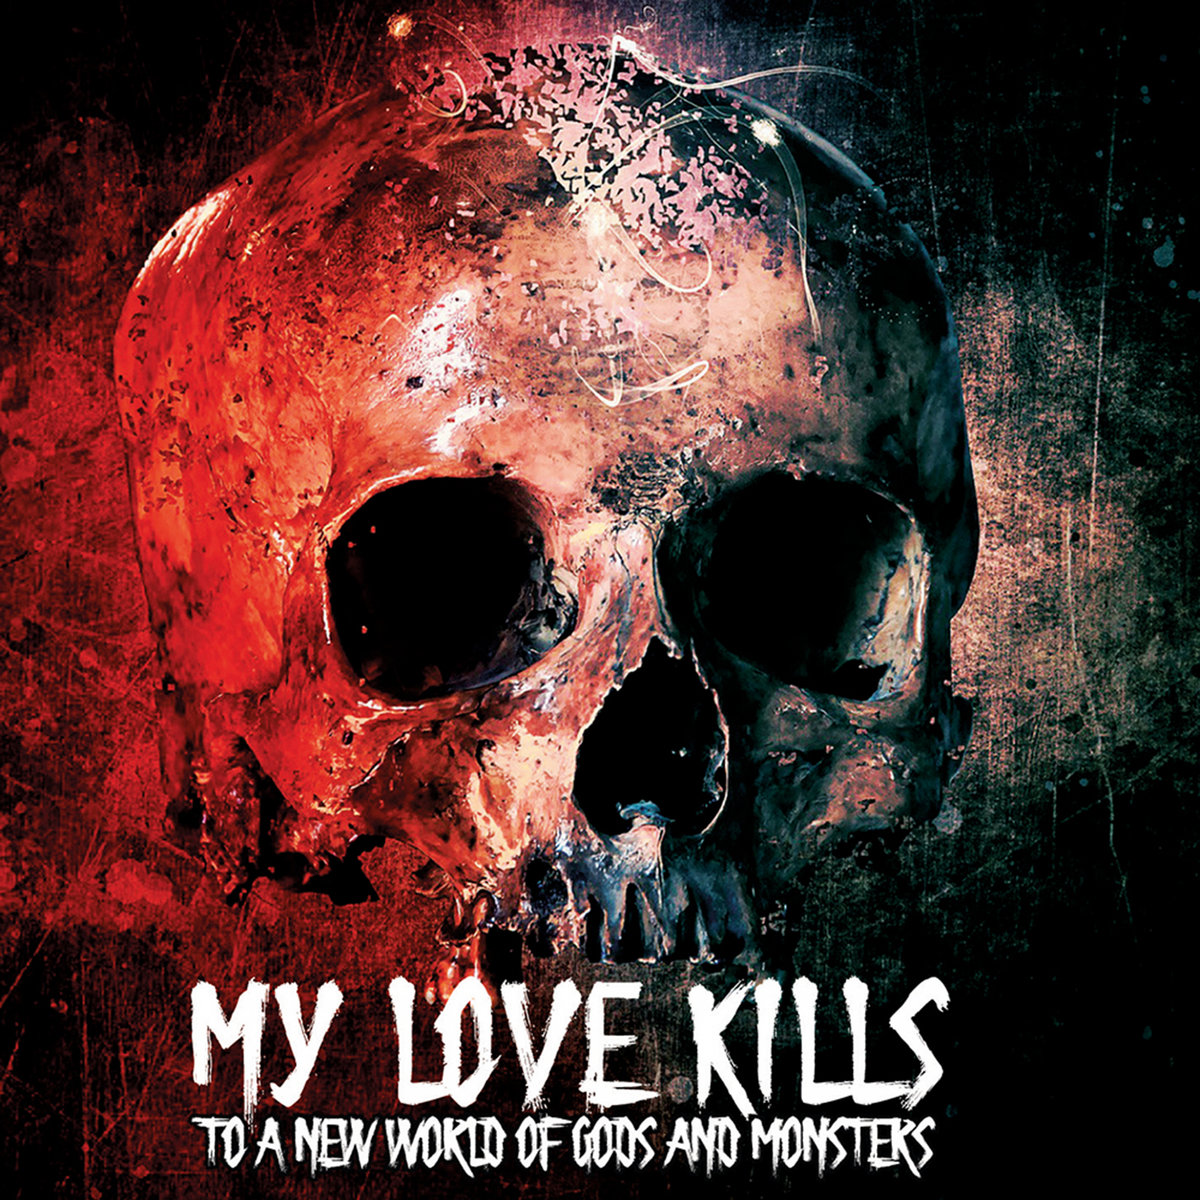 My Love Kills, “To A New World Of Gods And Monsters”